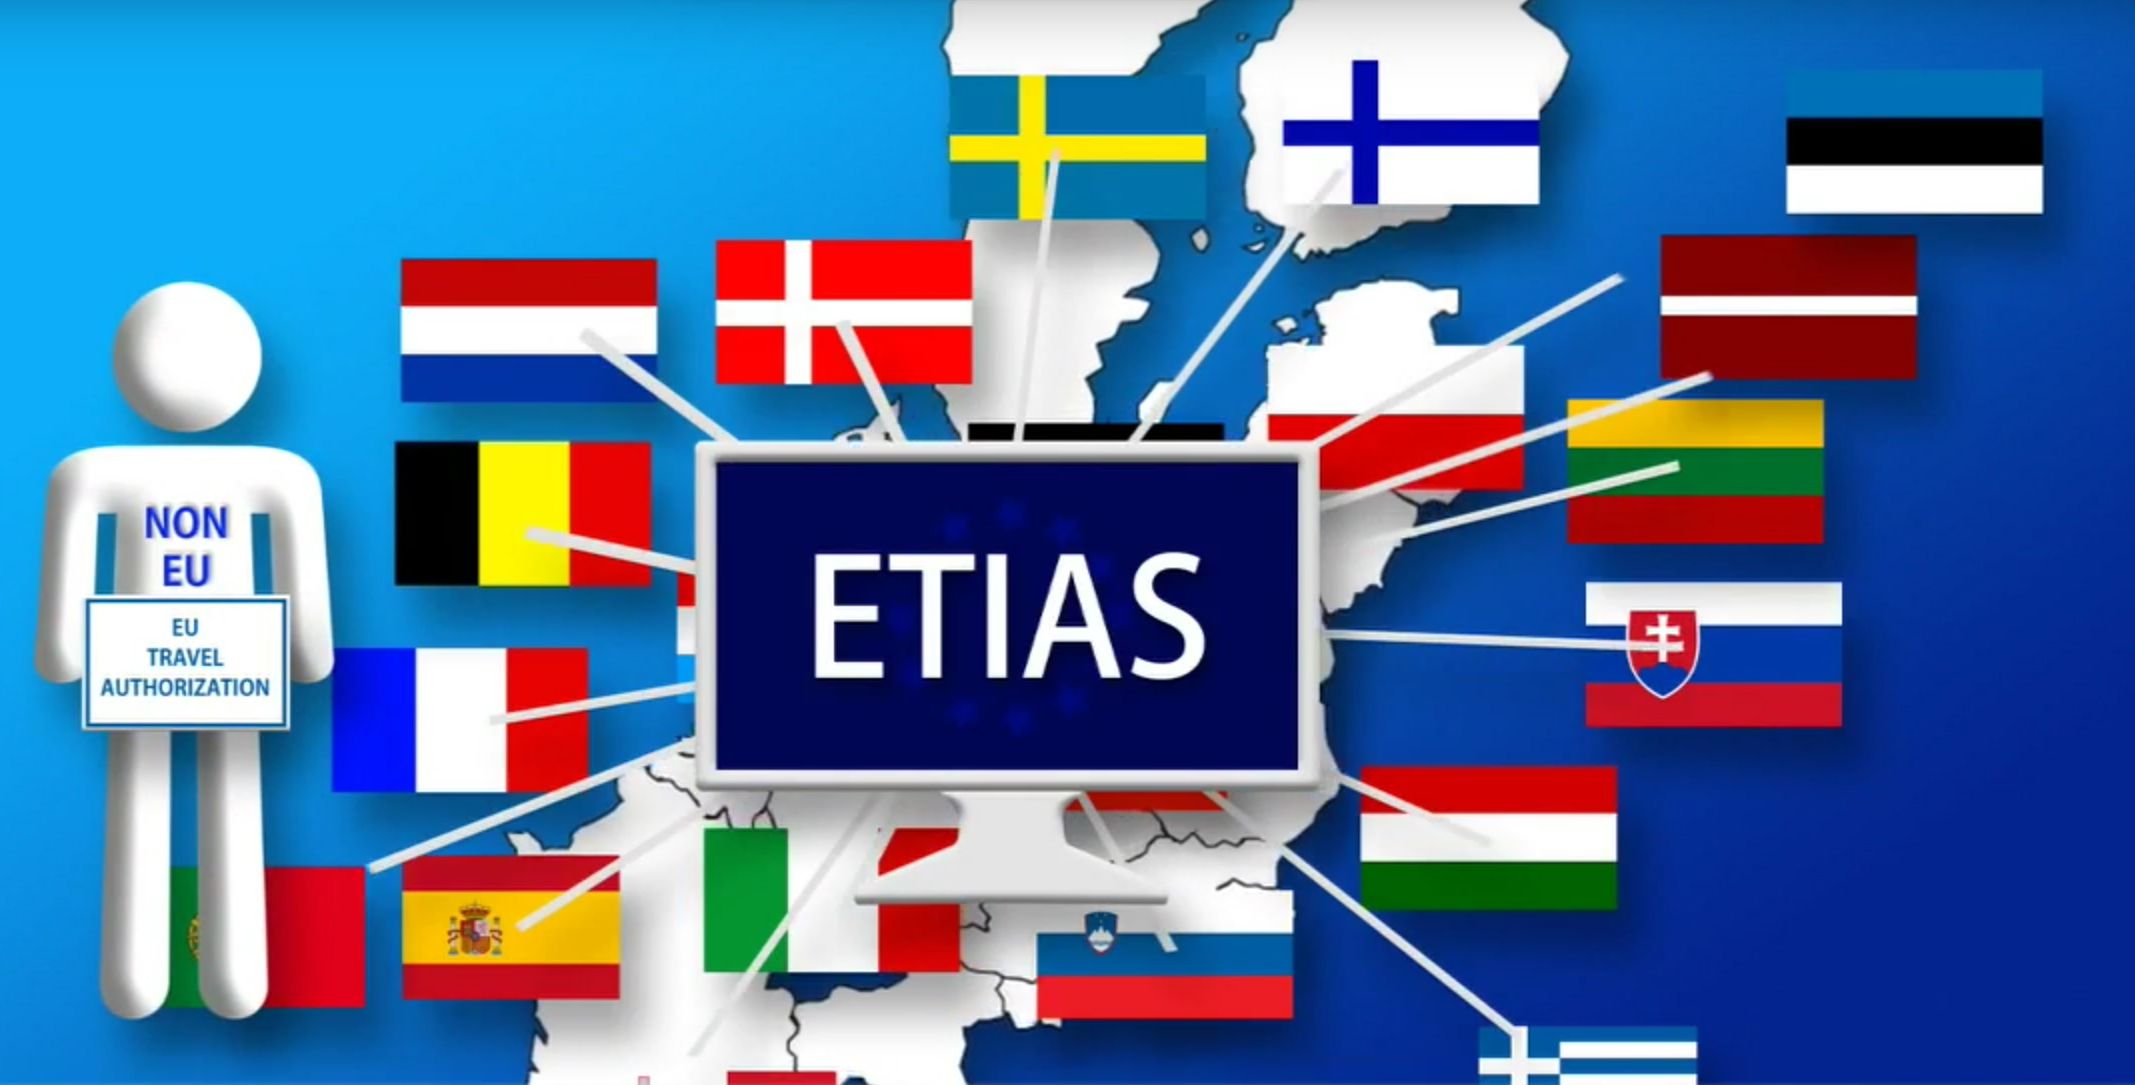 Venezuelan visitors will have to obtain a permit from the European Travel Information and Authorization System (ETIAS) to enter the EU